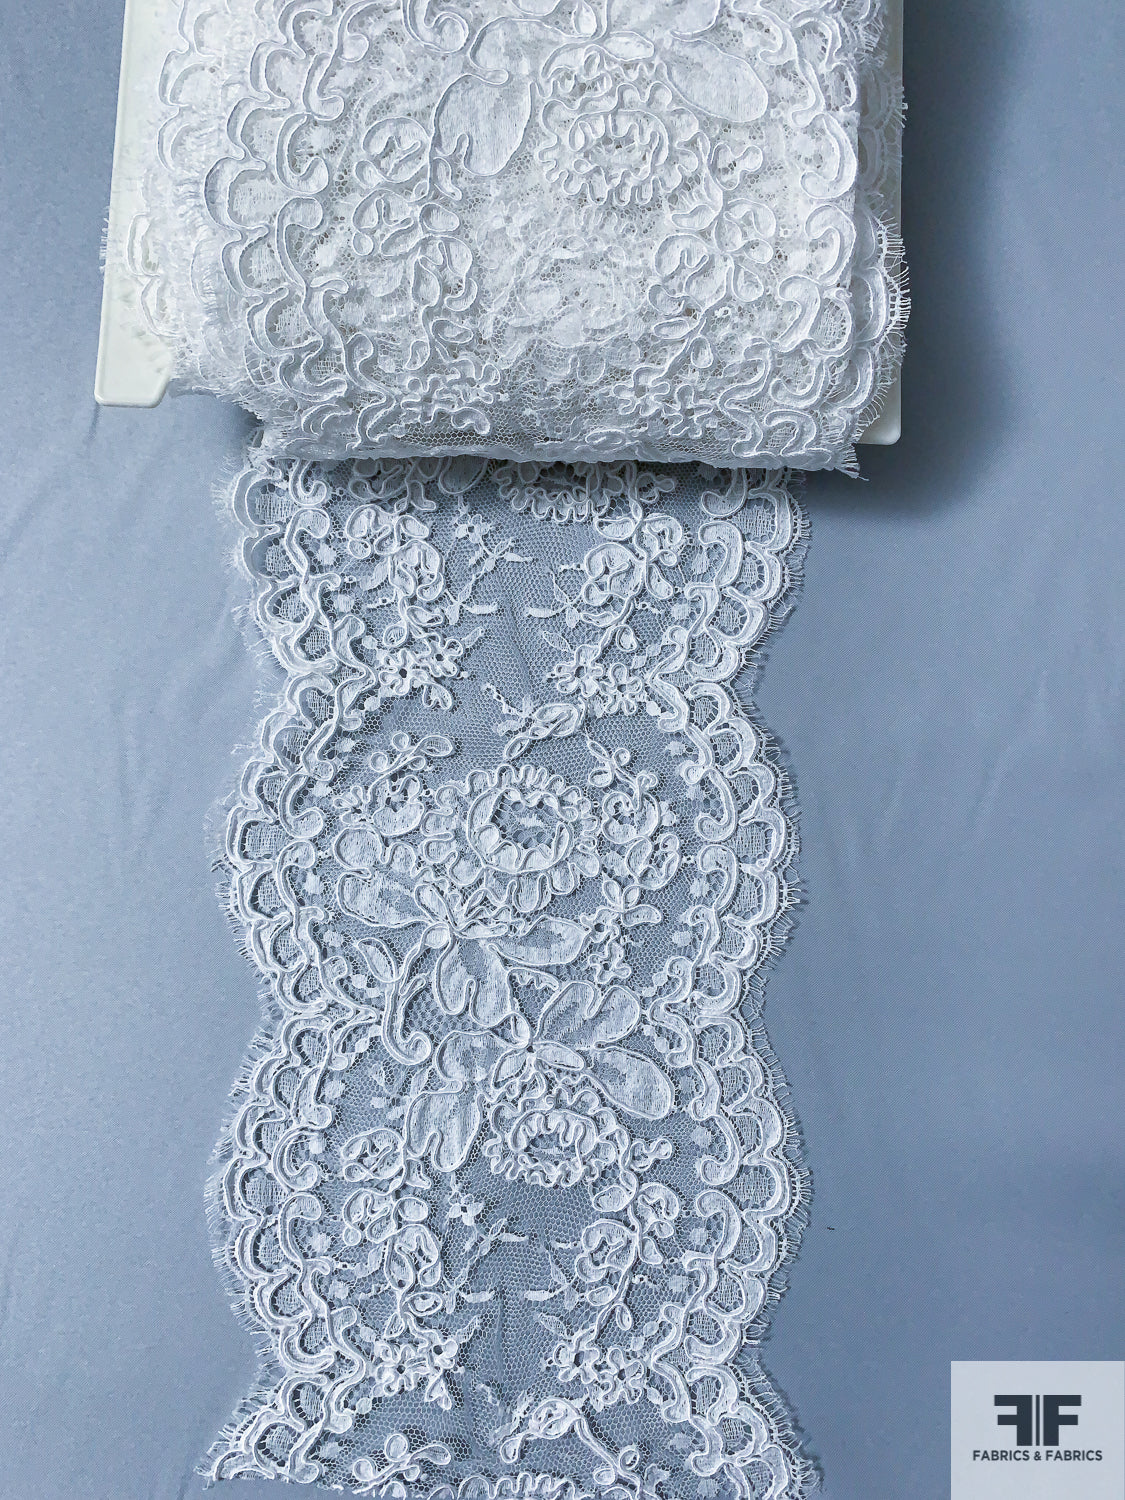 French Delicate Floral Alencon Lace - Ivory  Bridal lace fabric, White lace  fabric, Alencon lace